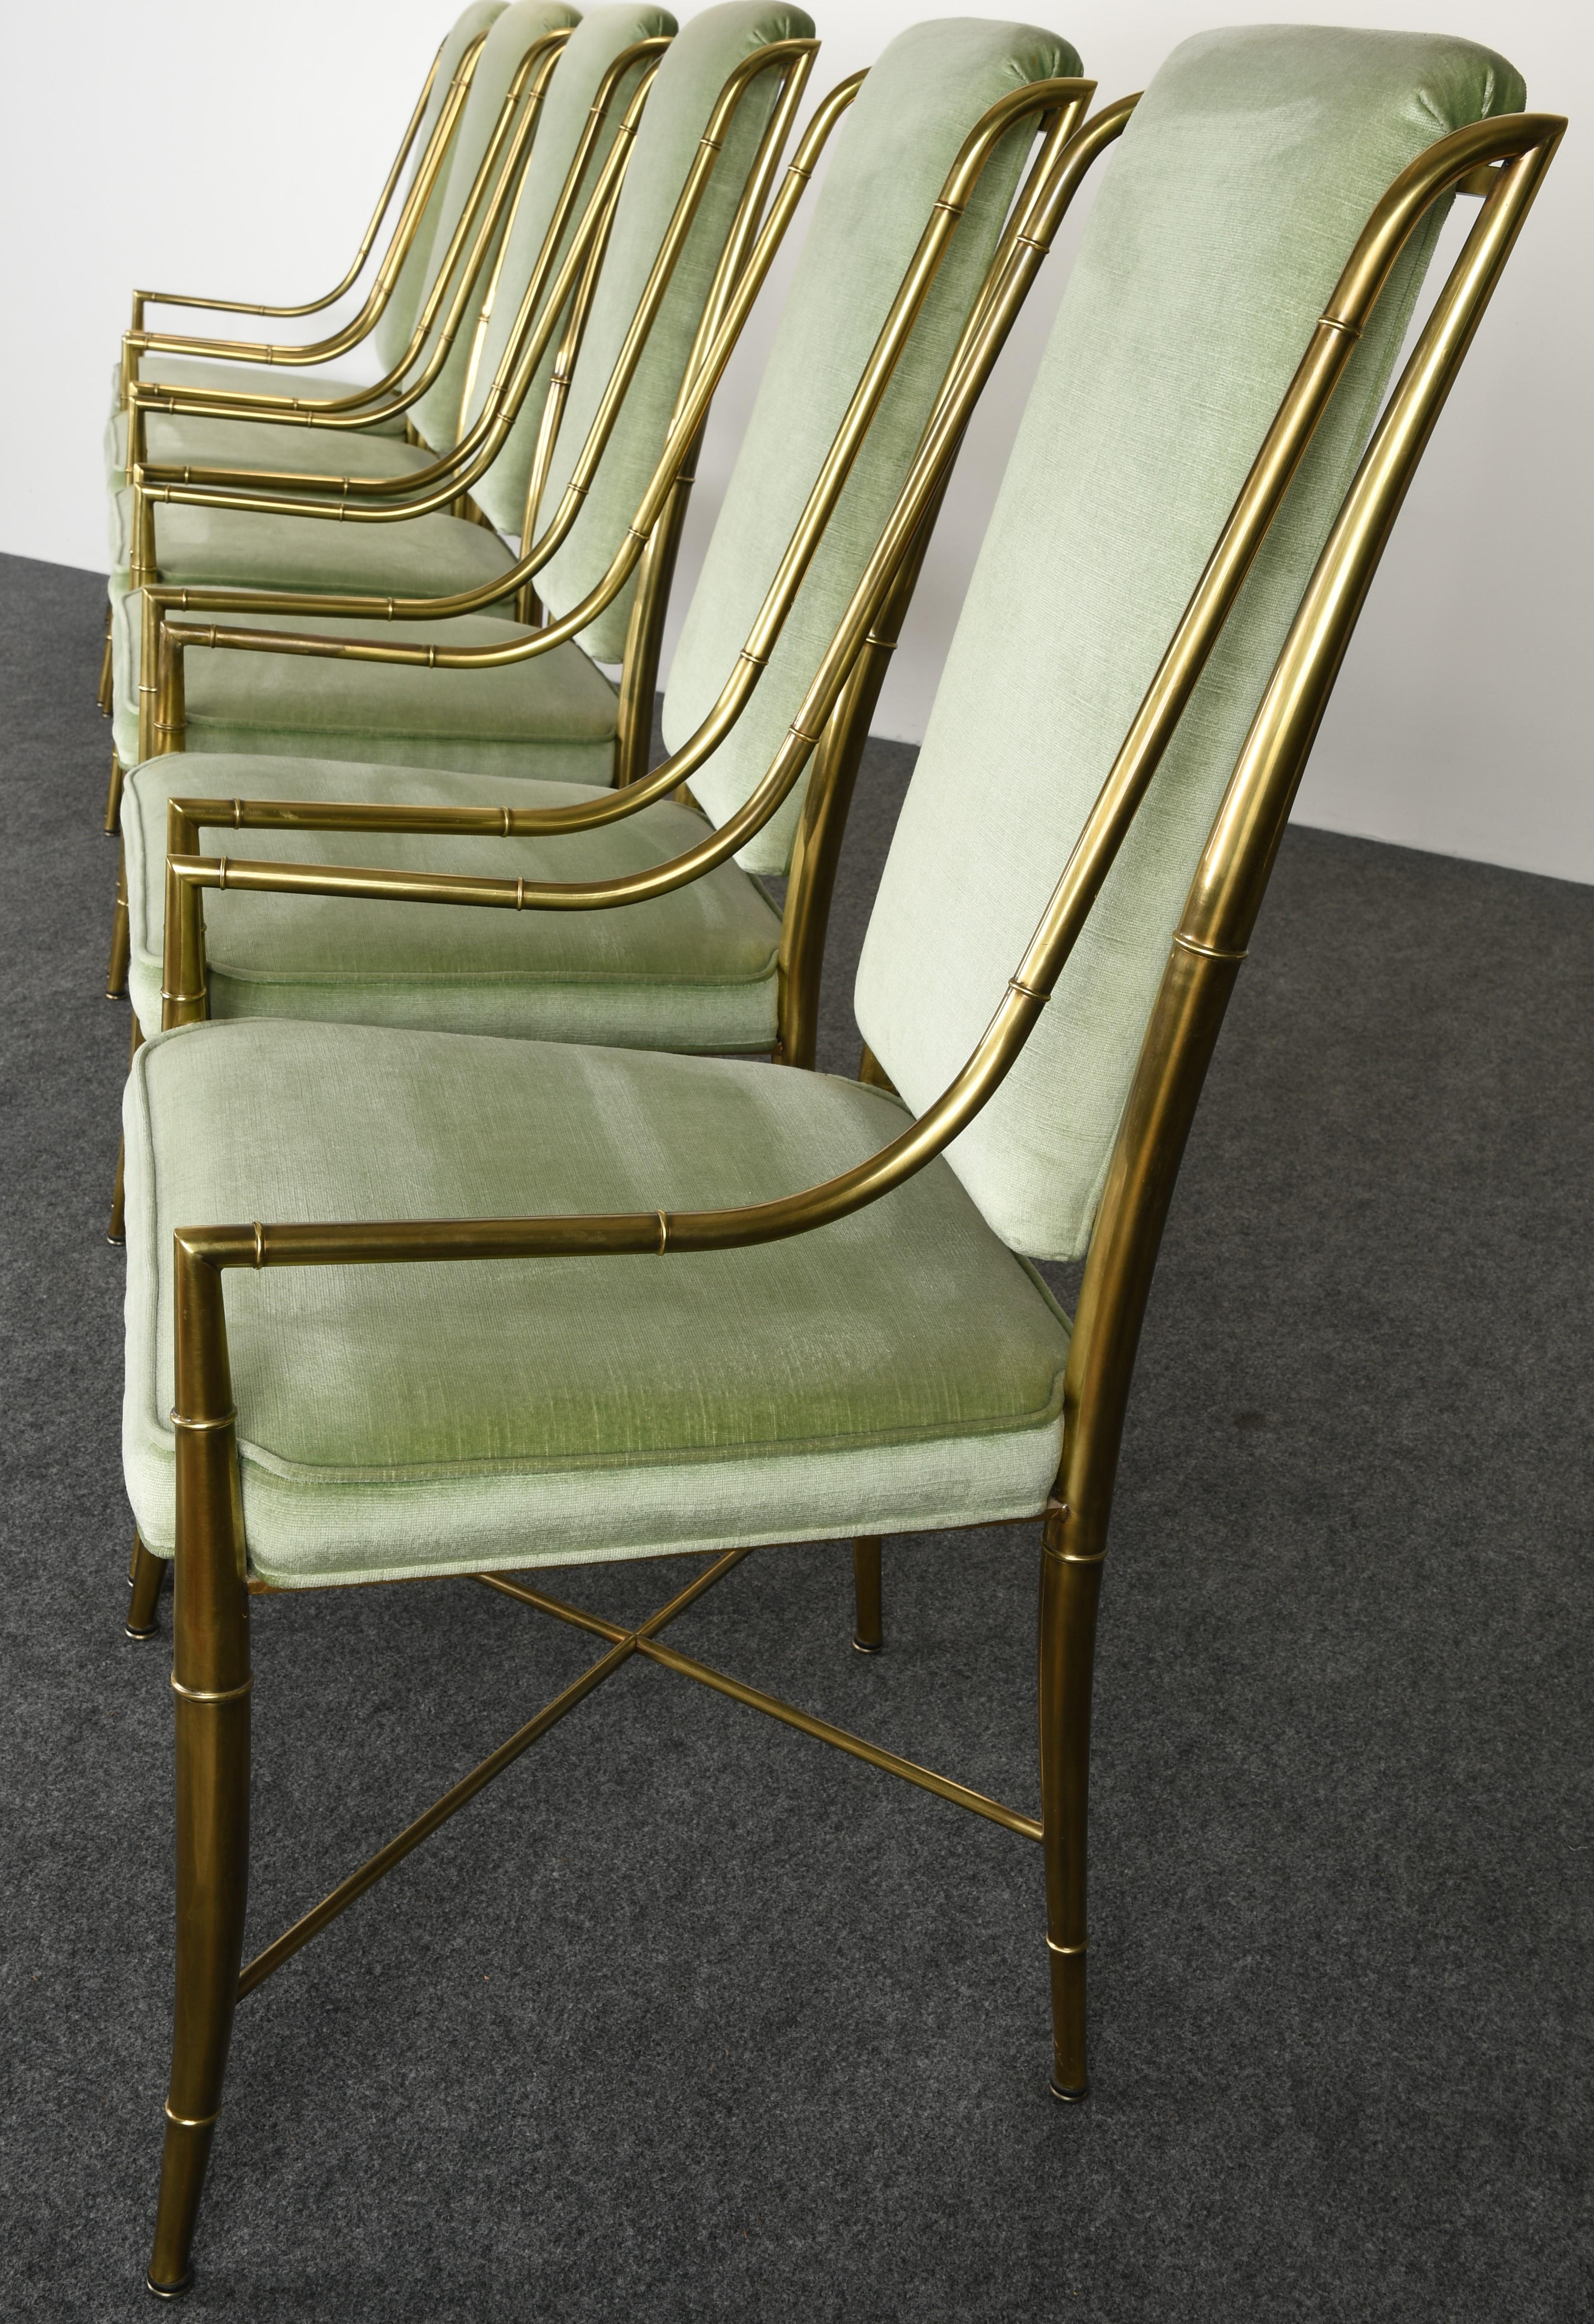 A magnificent set of six chairs known as 